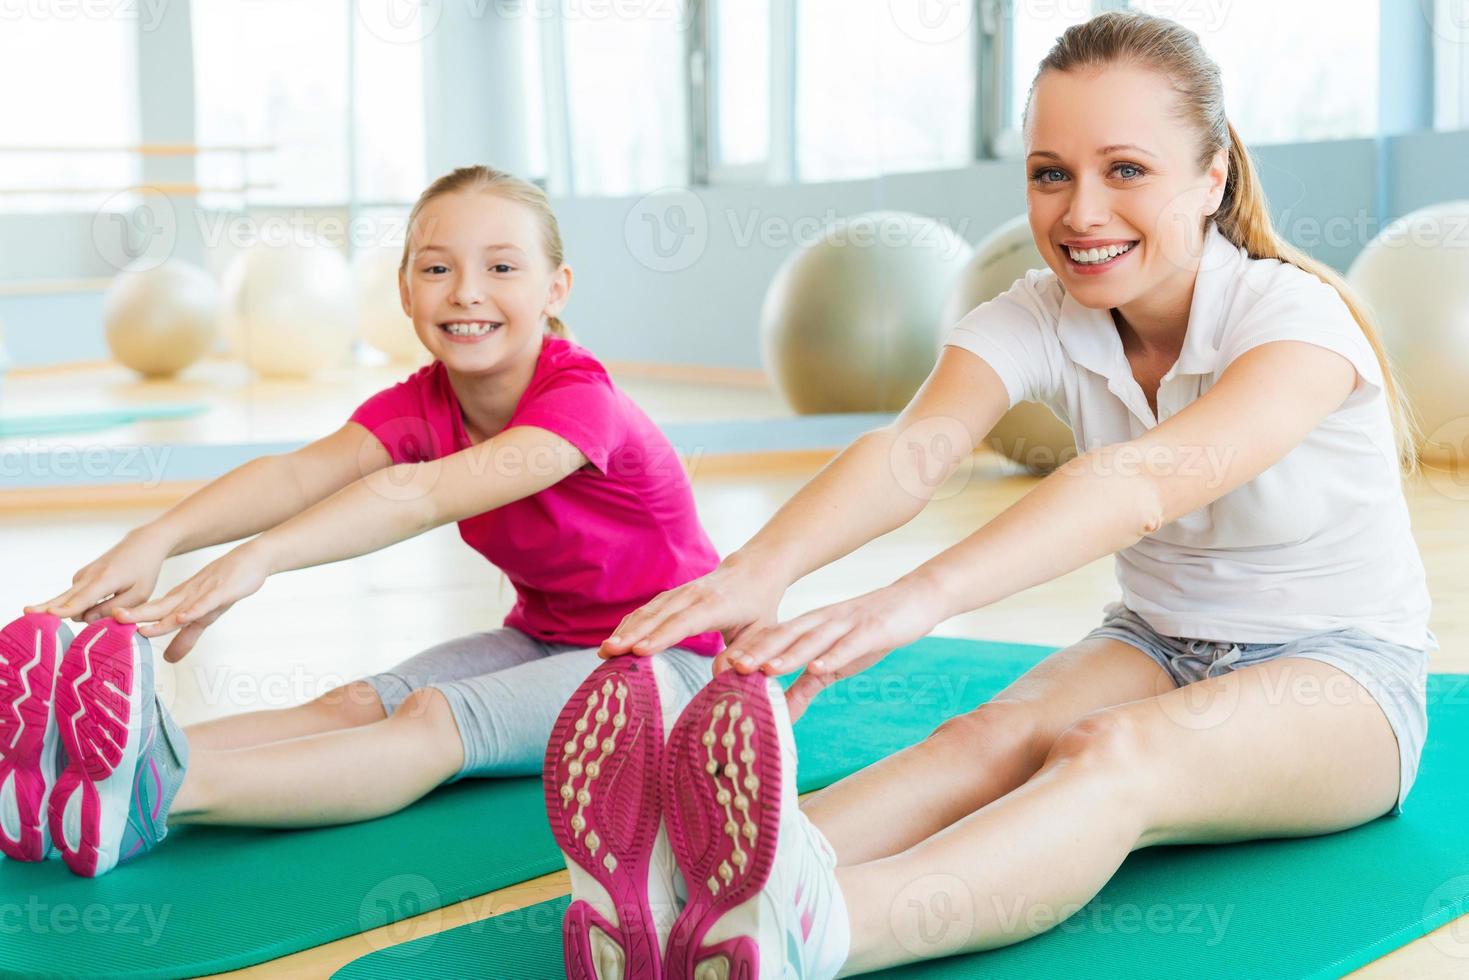 Sporty mother and daughter. Cheerful mother and daughter doing stretching exercises and smiling while sitting on exercise mats in sports club photo